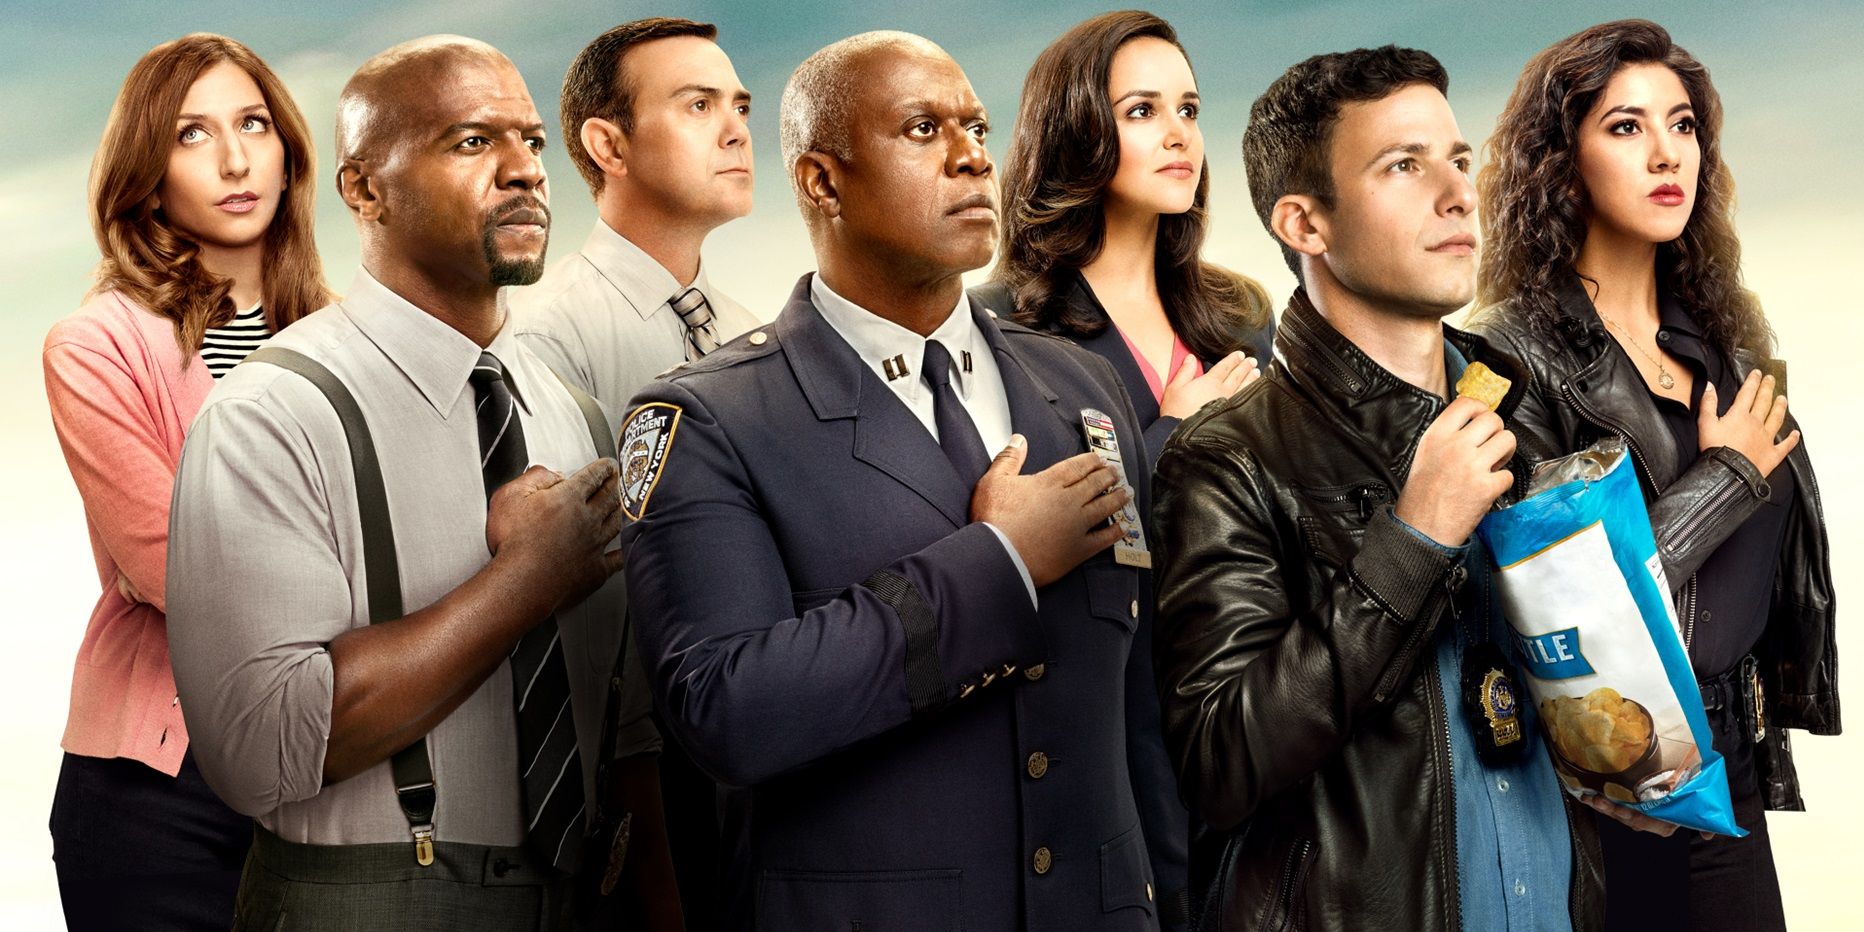 The cast of Brooklyn 99 in a promotional image